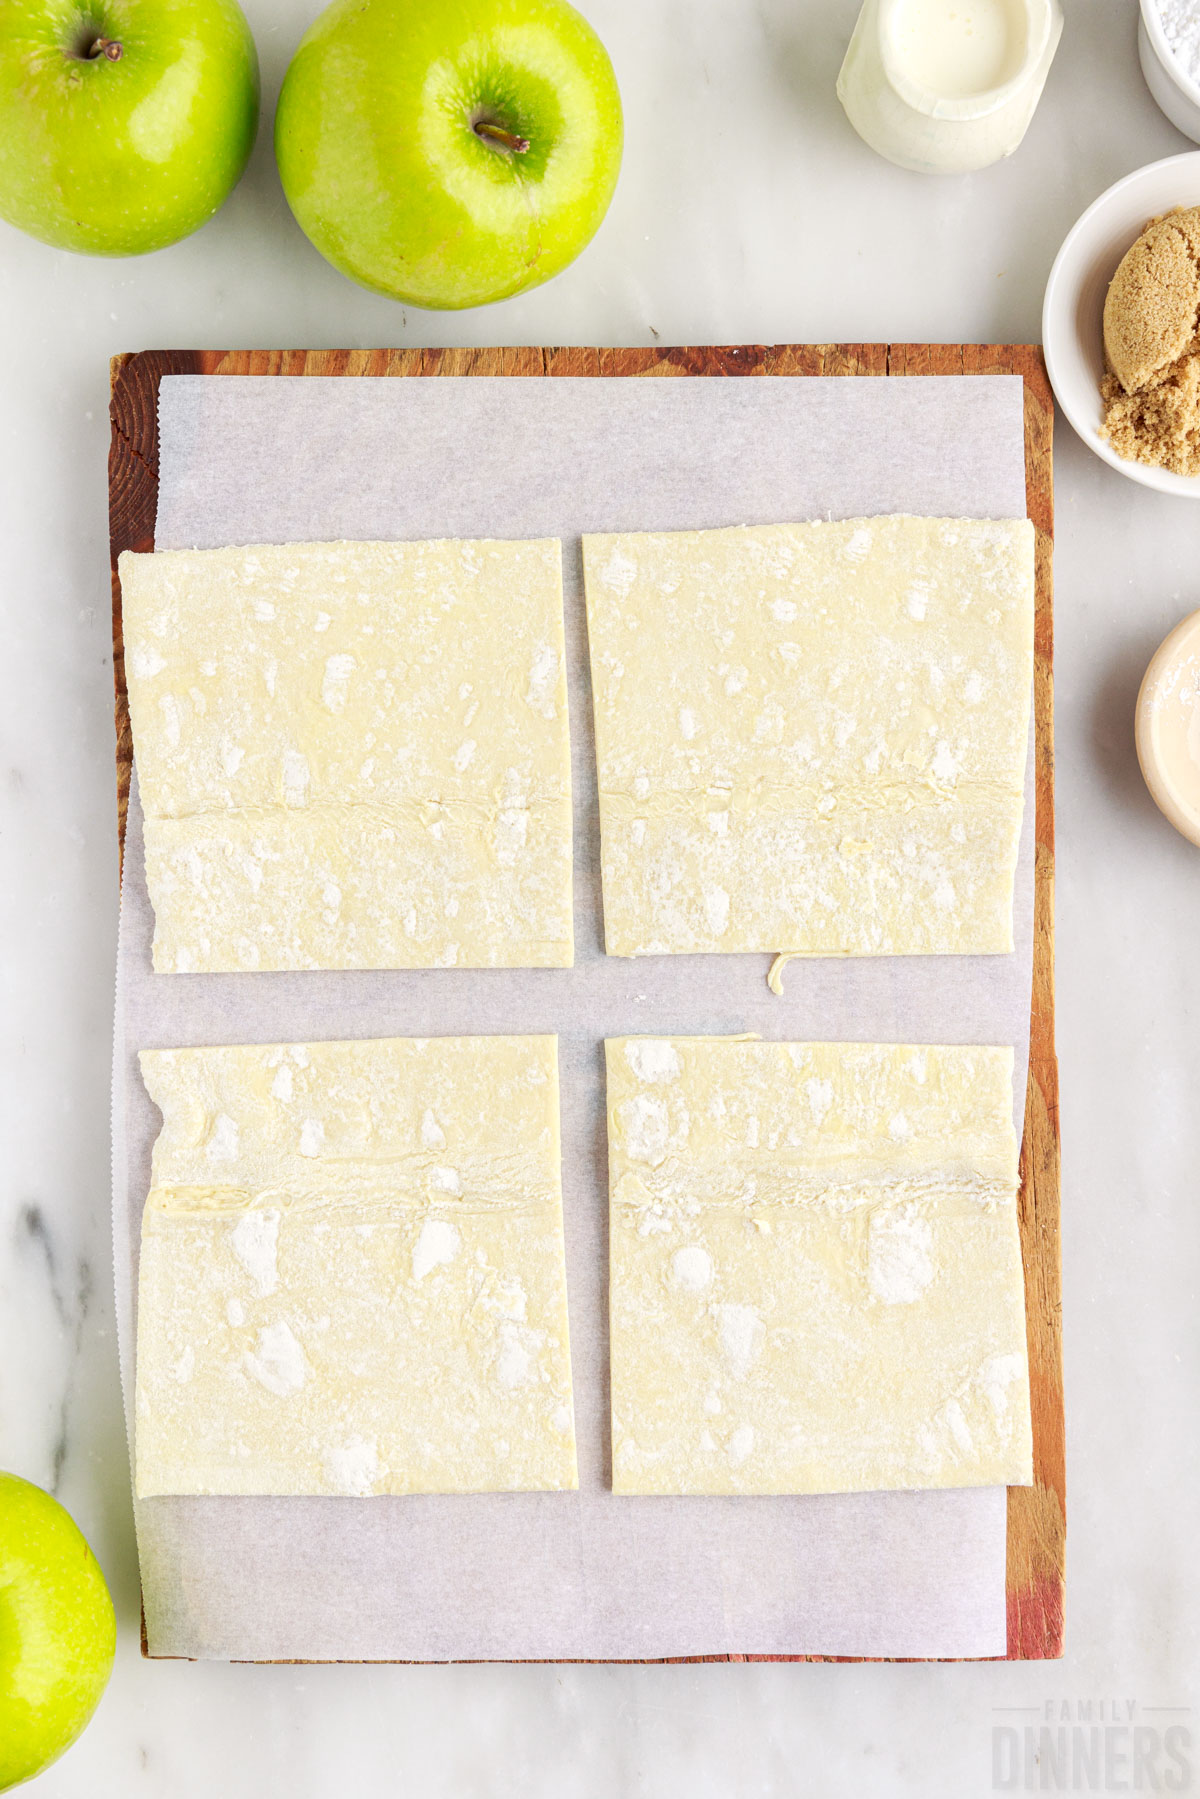 puff pastry squares on parchment paper